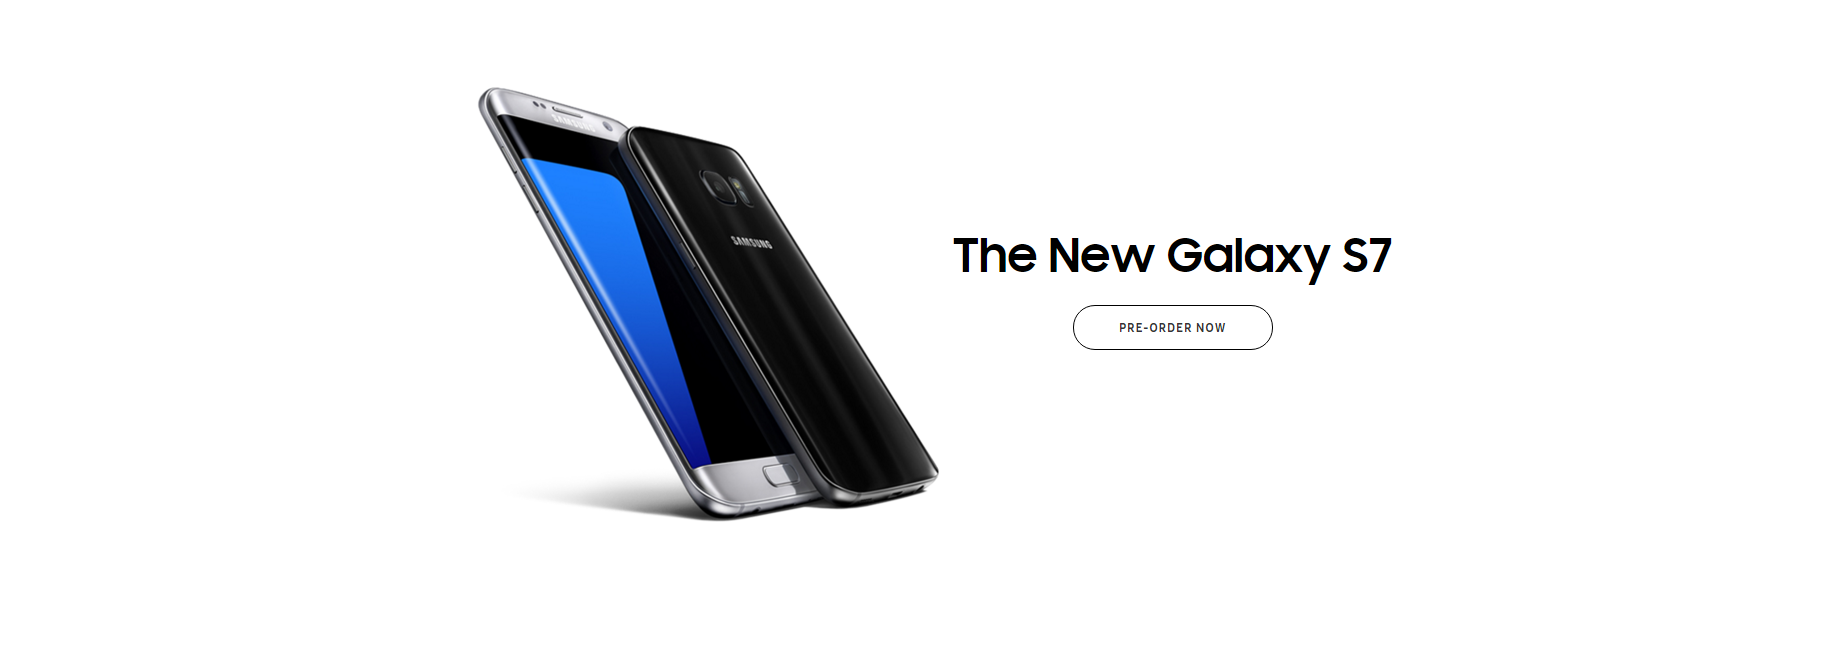 Samsung Galaxy S7 and Galaxy S7 Edge, Now Available for Pre-Order at Smart